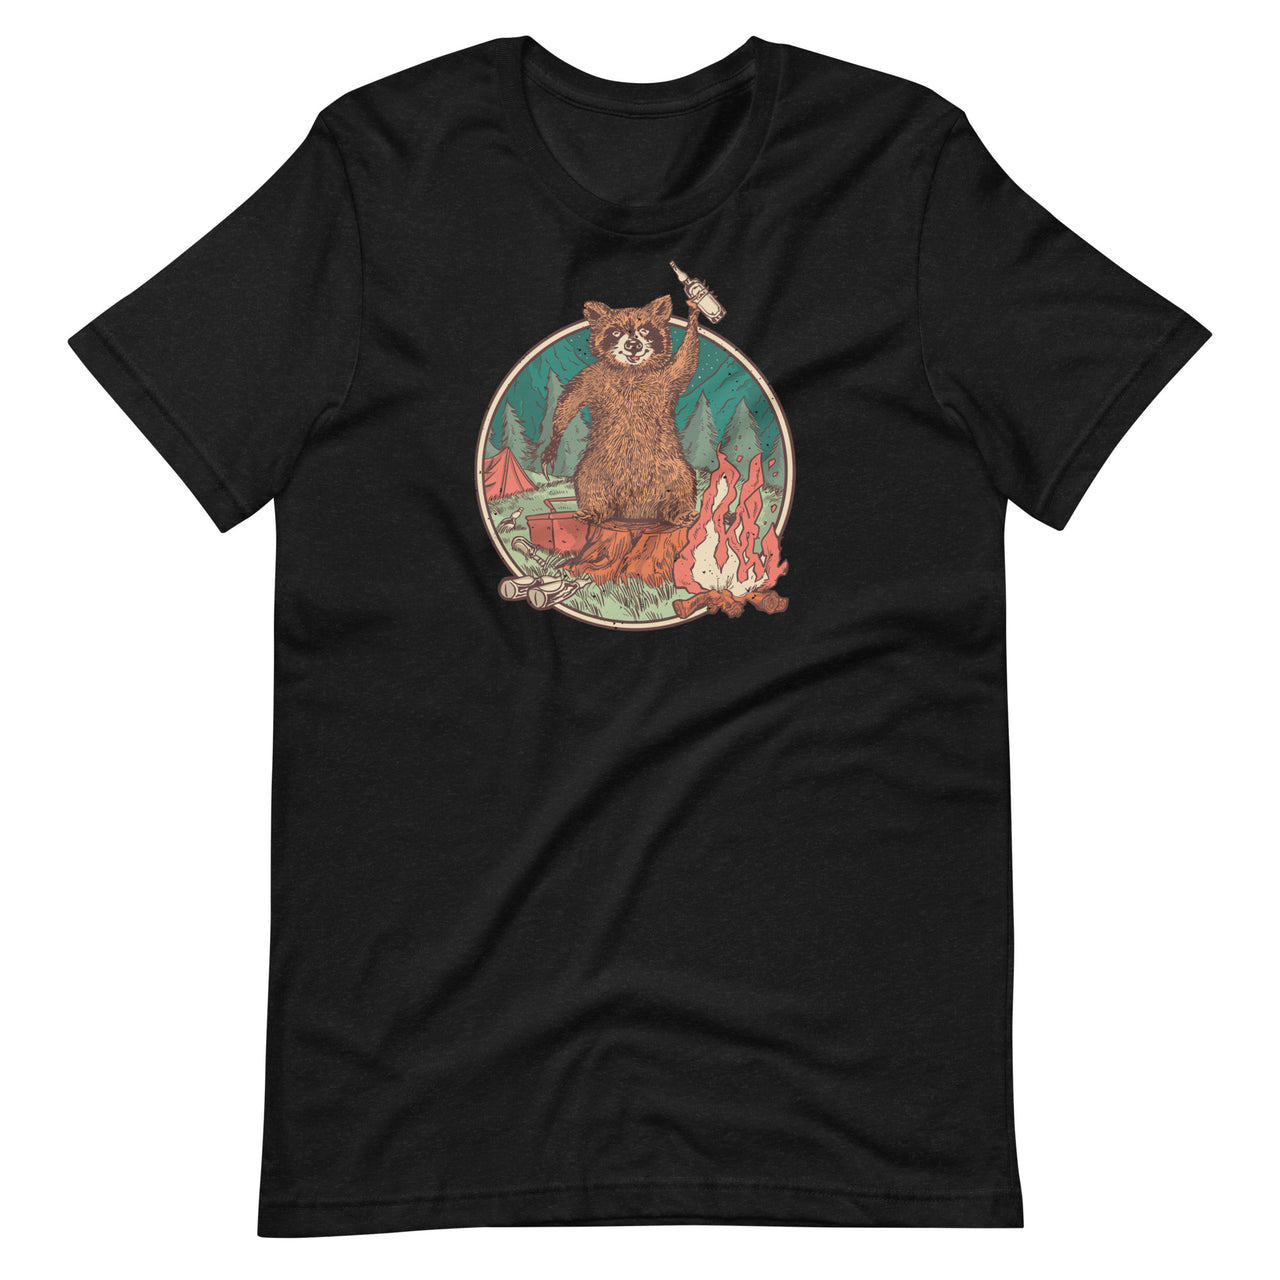 Camping Raccoon with Beer at the Campfire T-shirt